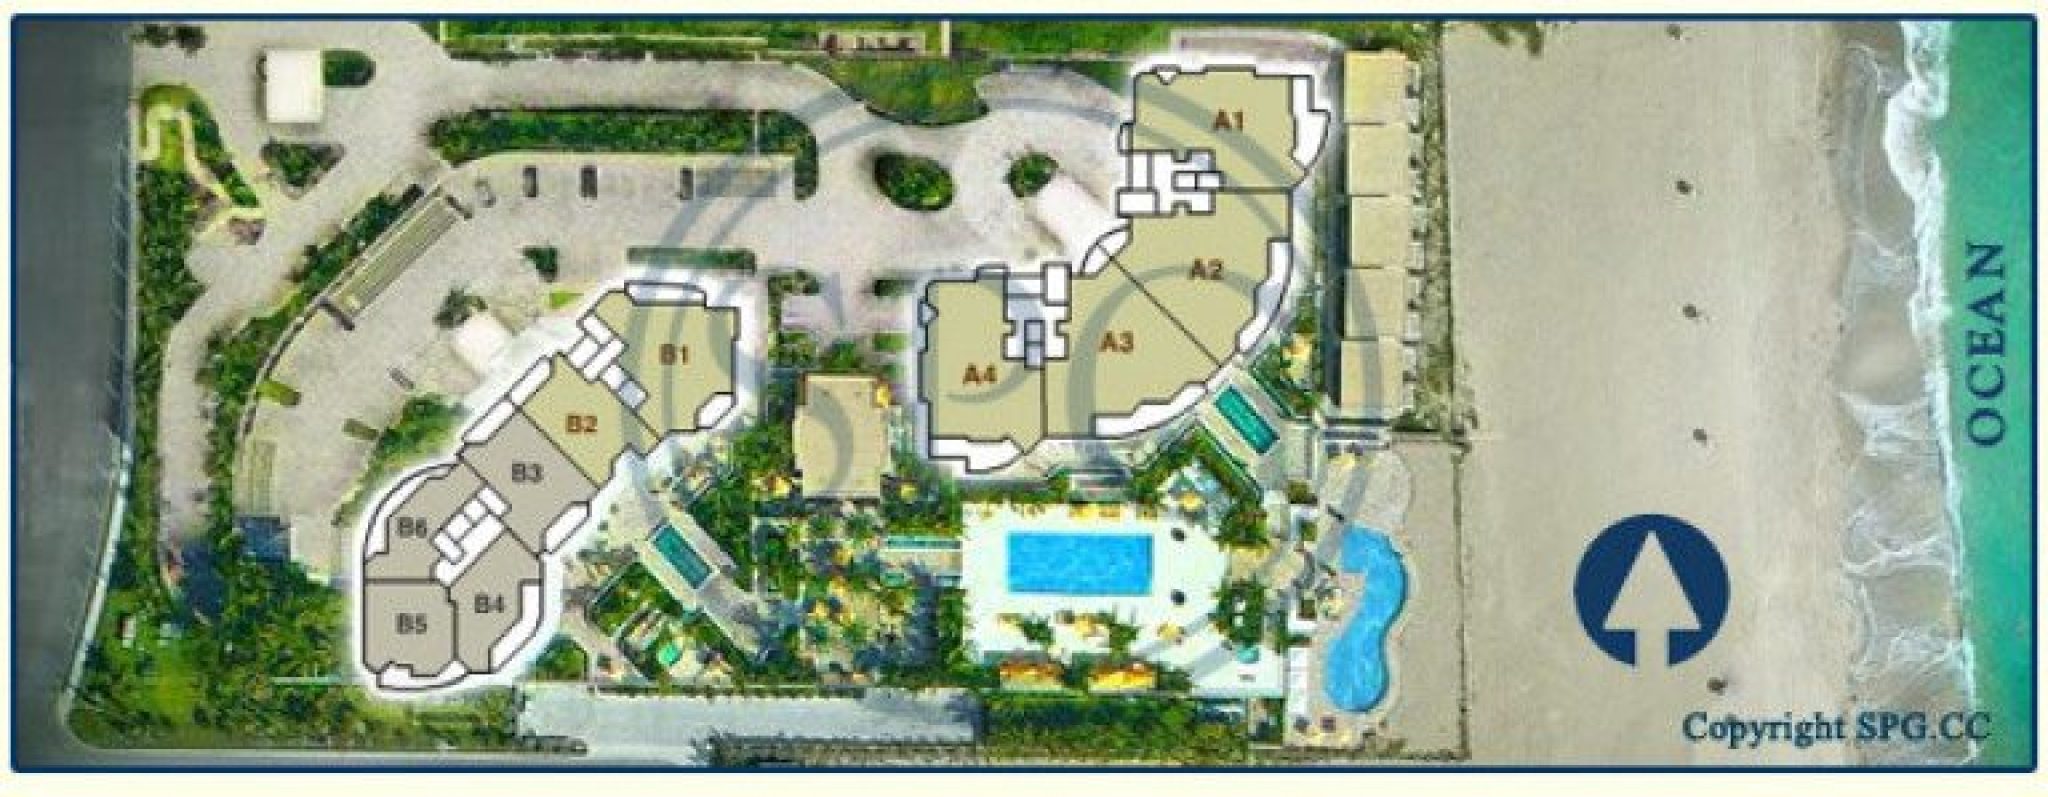 Siteplan for Ritz-Carlton Residences, Luxury Oceanfront Condominiums Located at 2700 North Ocean Drive, Singer Island, Florida 33404